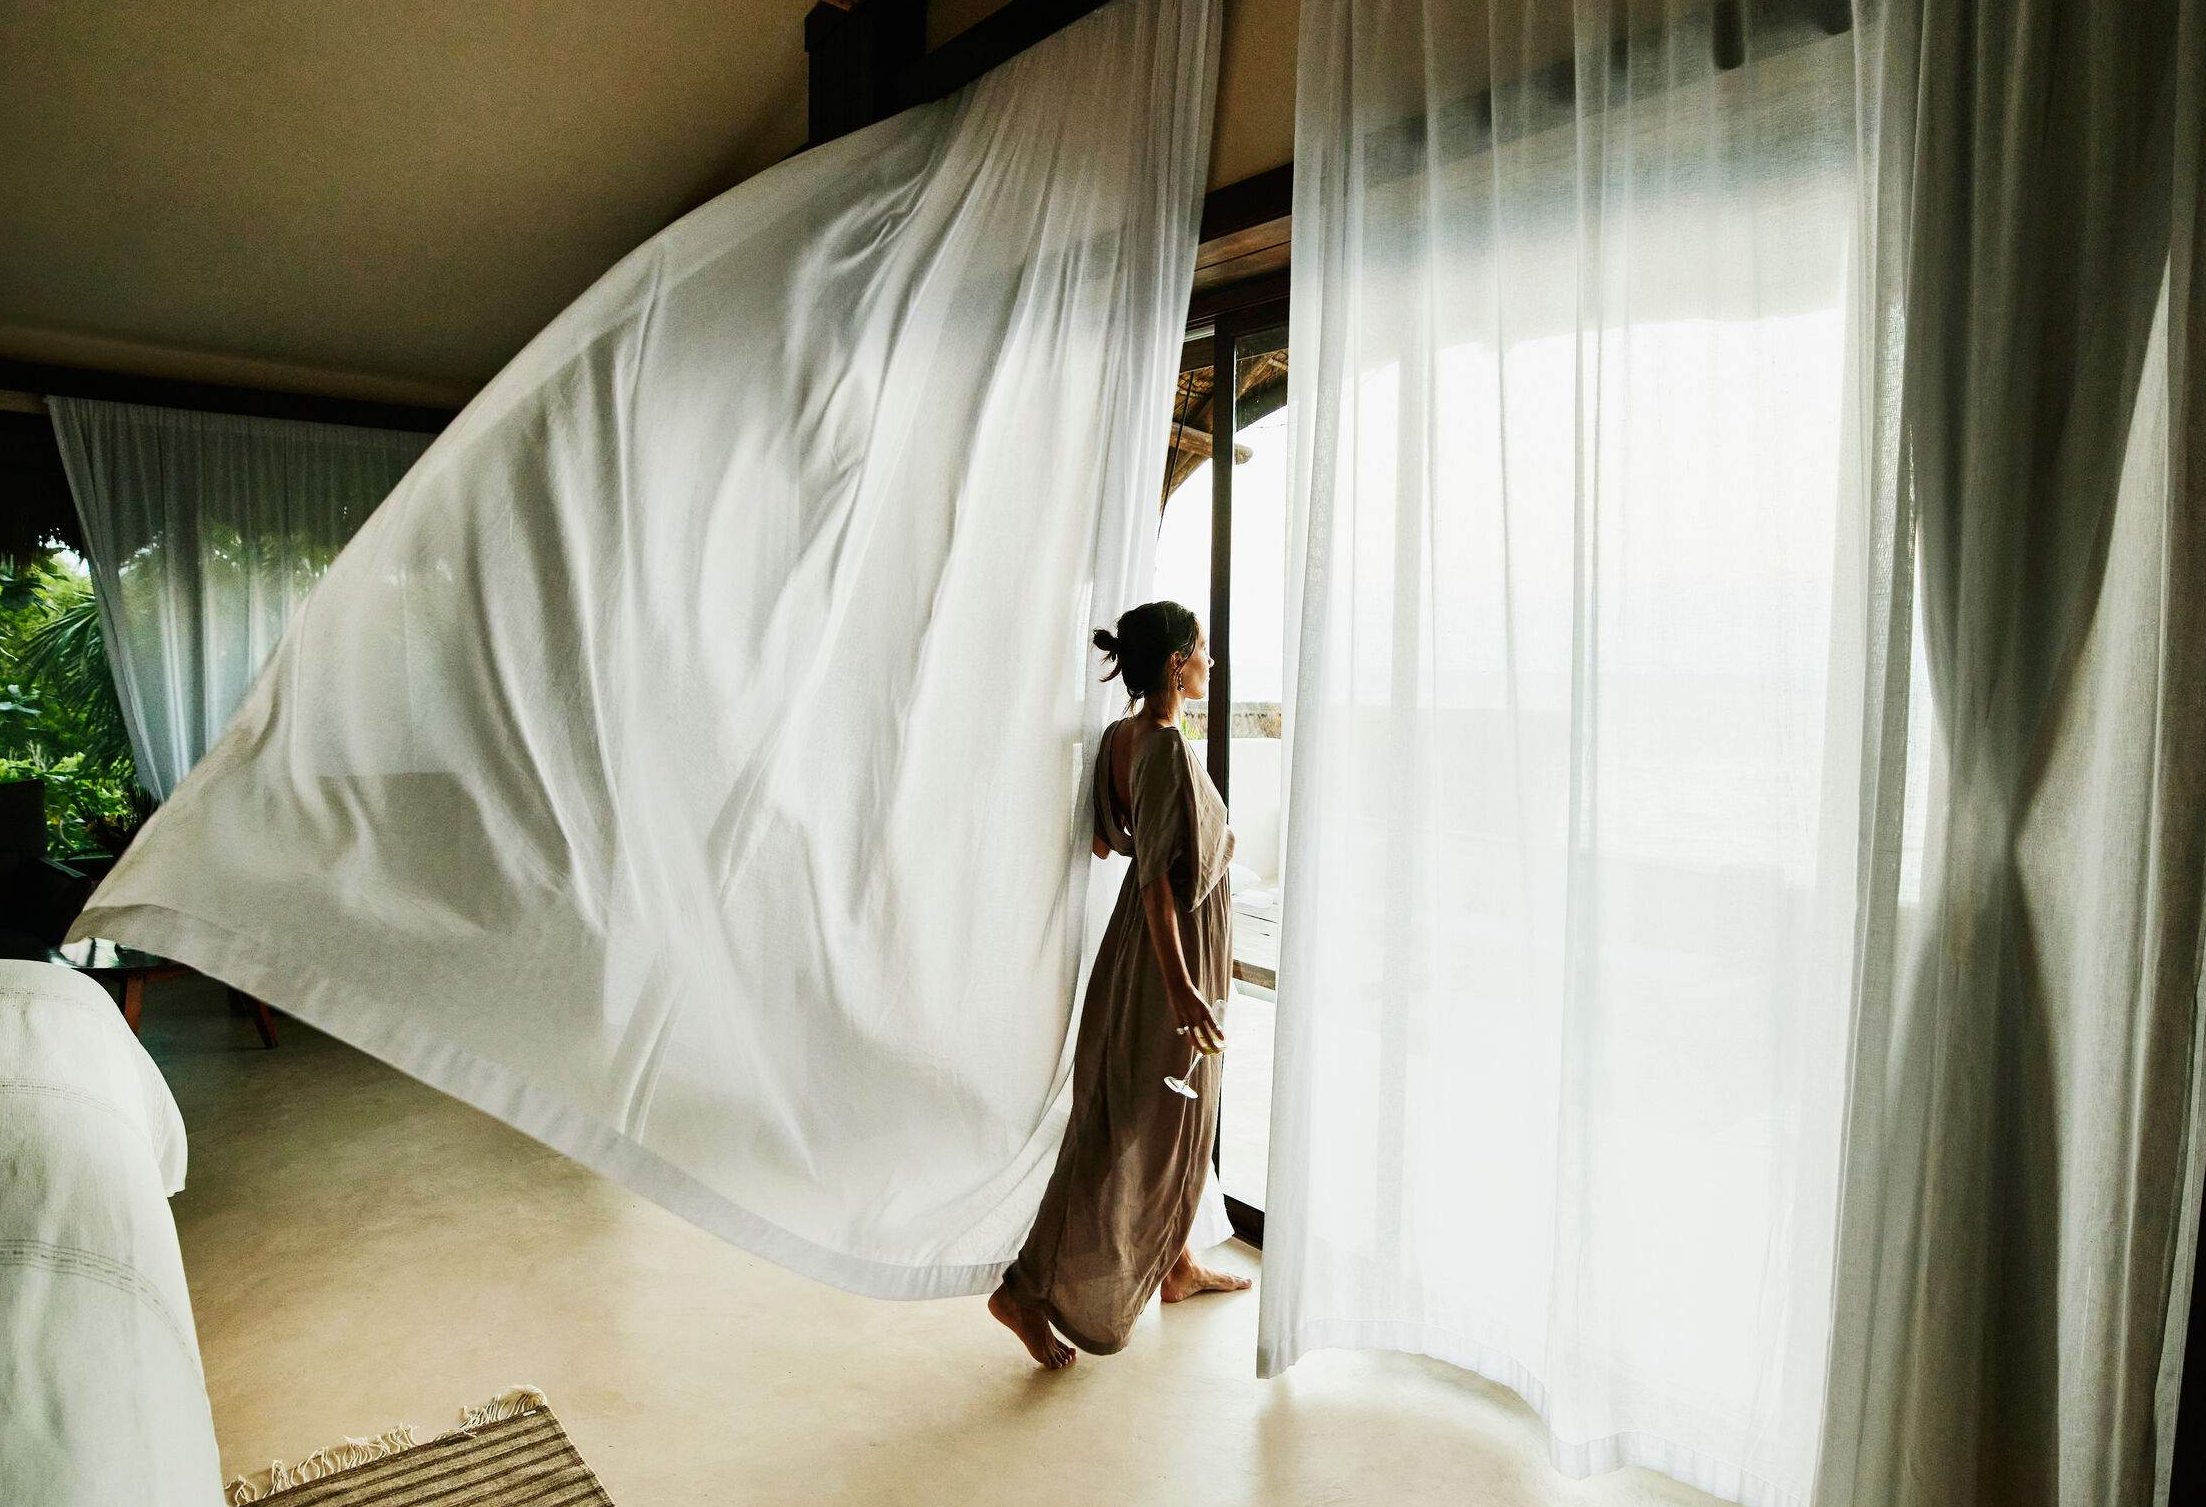 A woman stands beside a big window as the breeze flows through the curtains.